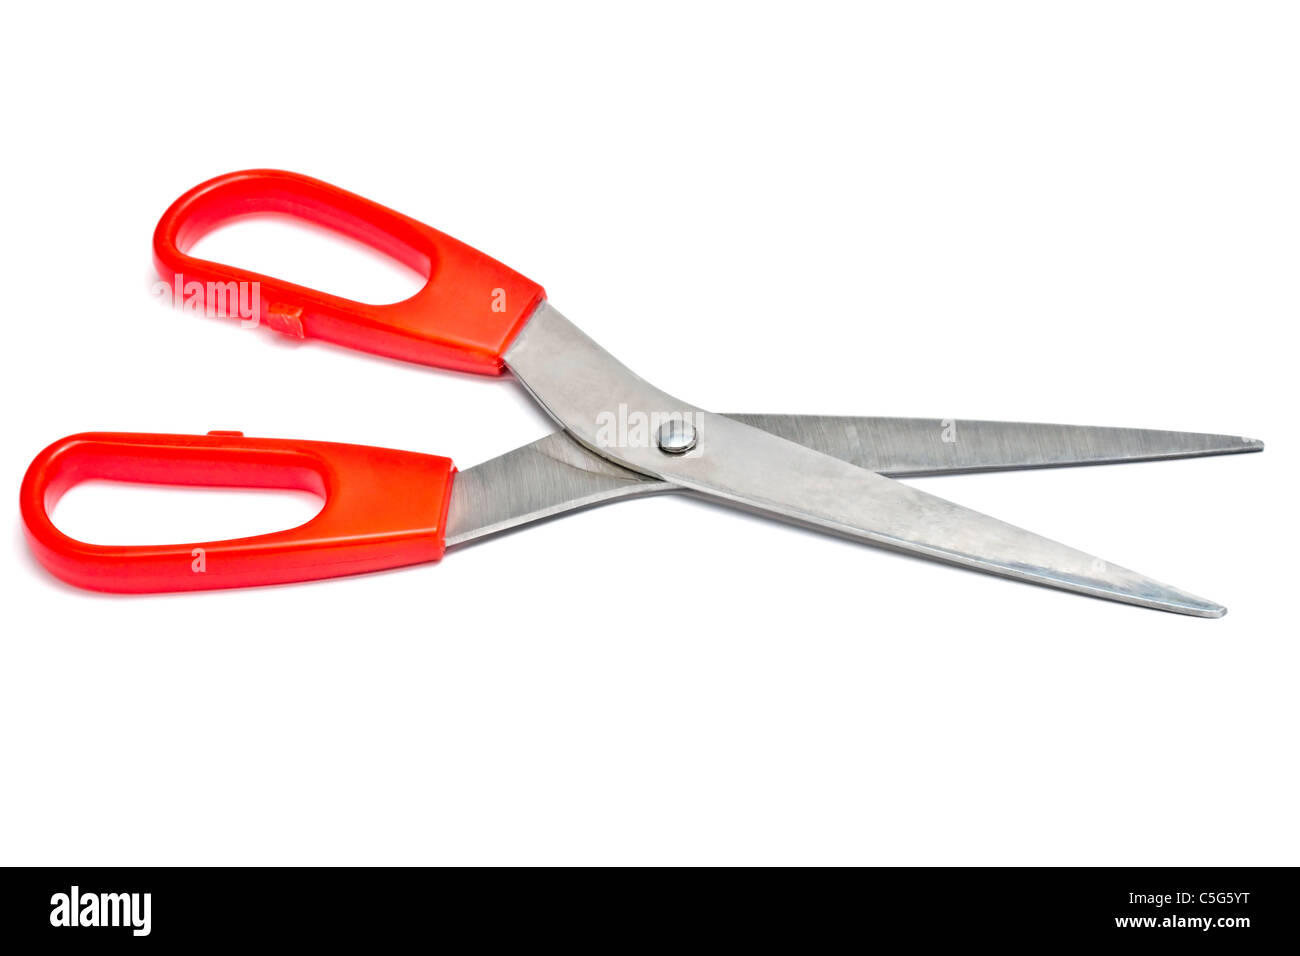 Red handled scissors isolated on white background Stock Photo